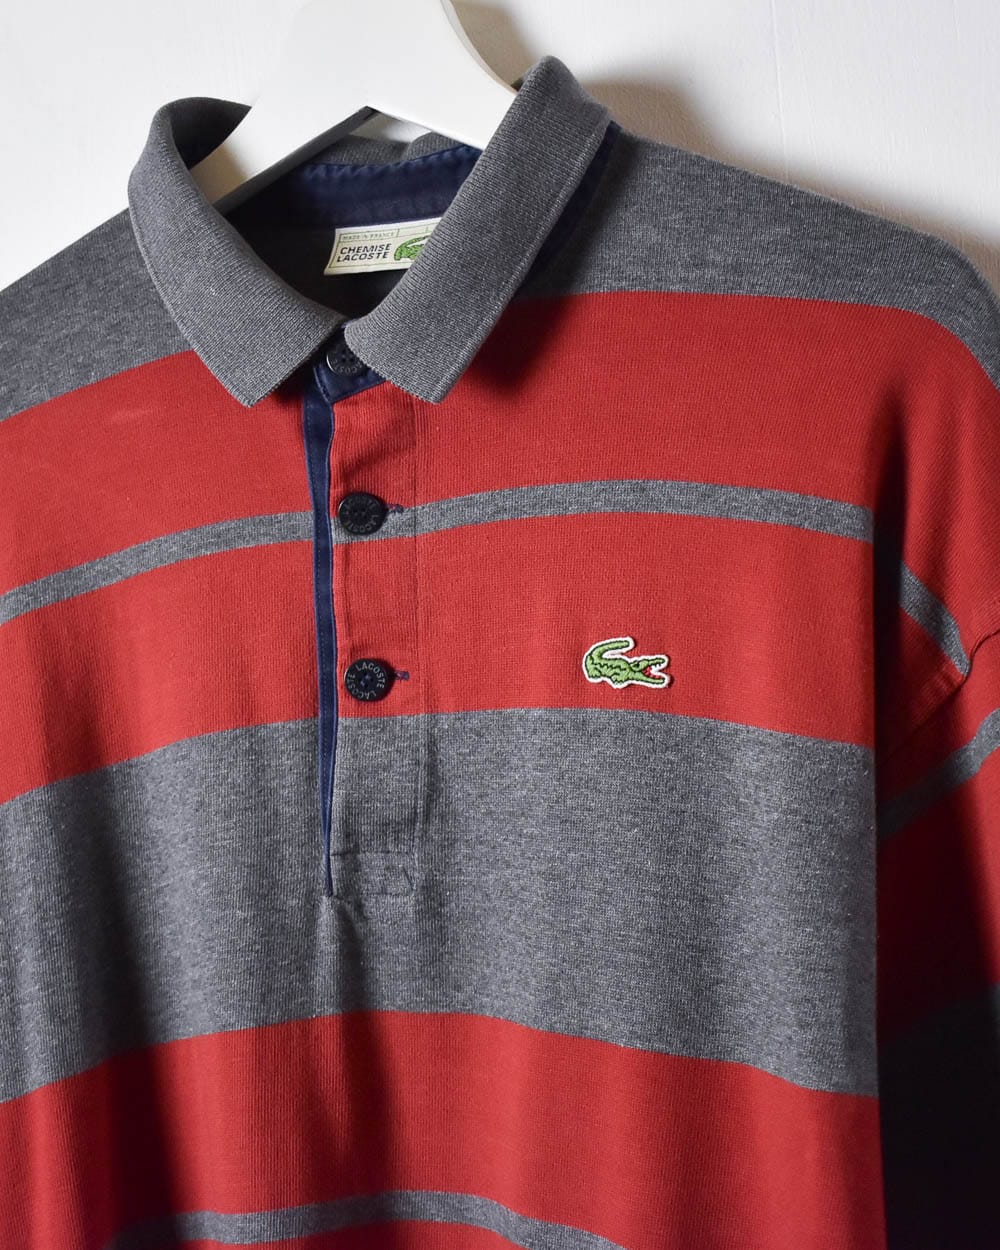 Red Chemise Lacoste Striped Long Sleeved Polo Shirt - Large